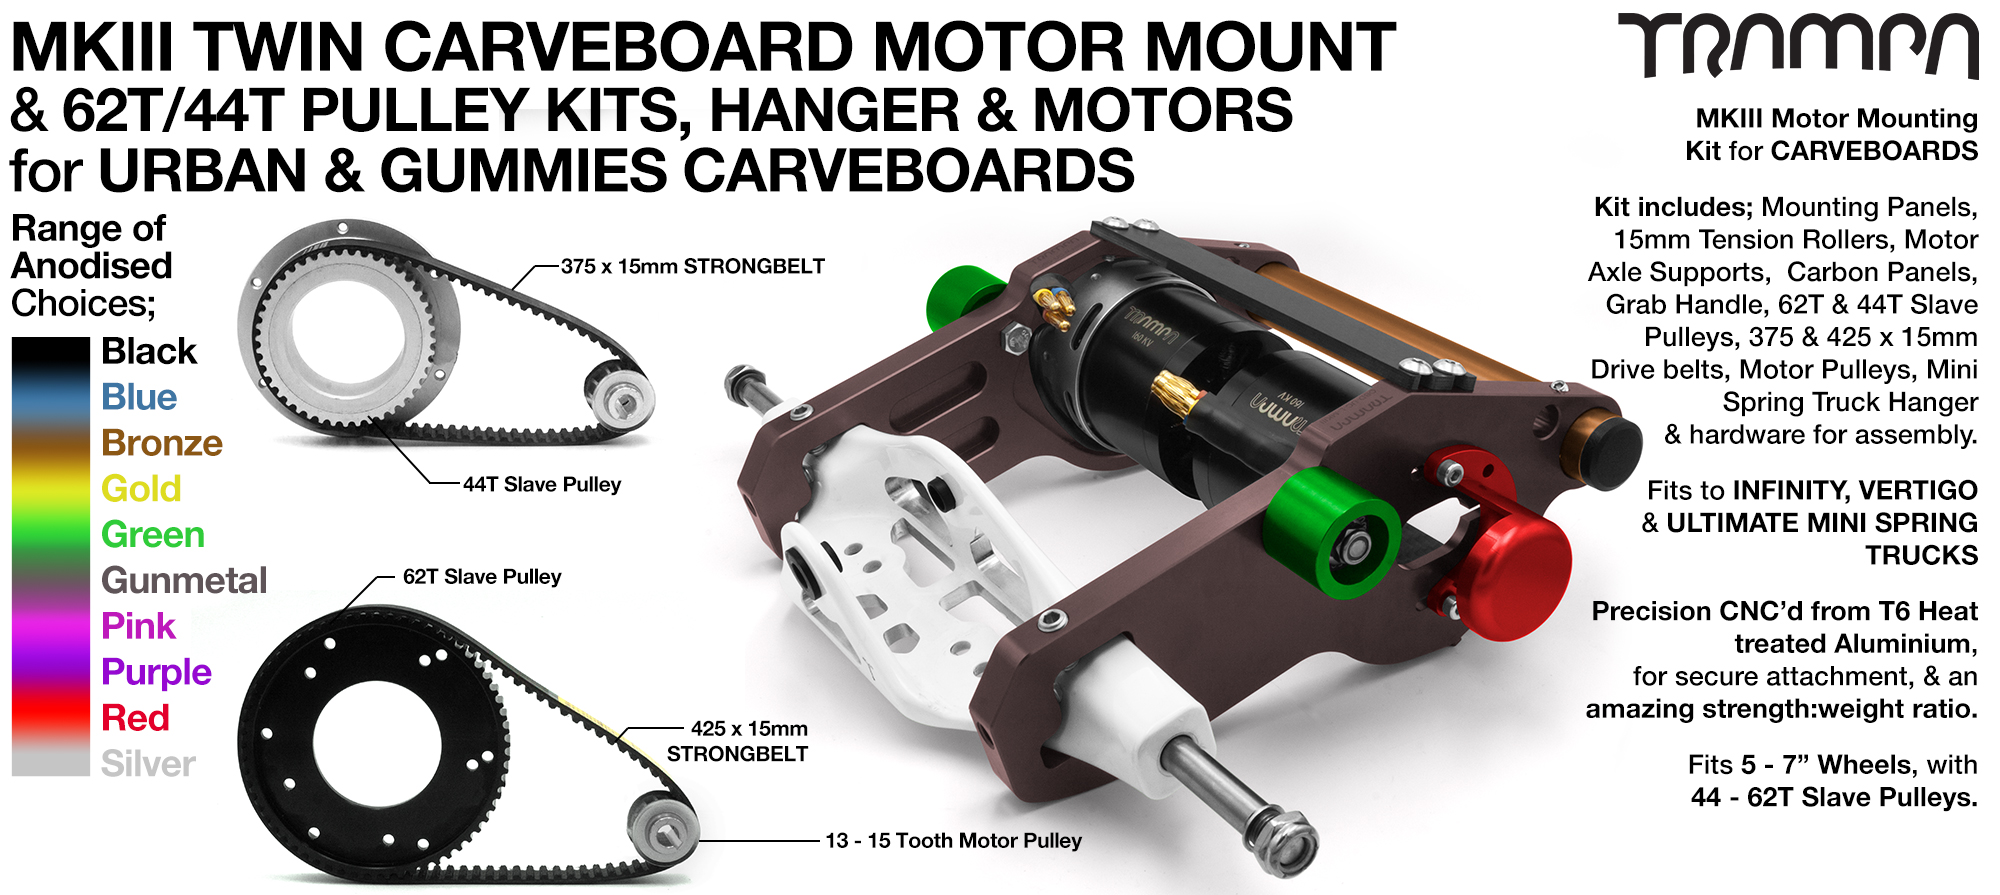 MkIII 2in1 CARVEBOARD Motormount on a HANGER with 44 tooth GUMMY & 62 tooth URBAN Pulleys & TRAMPA Motor - TWIN